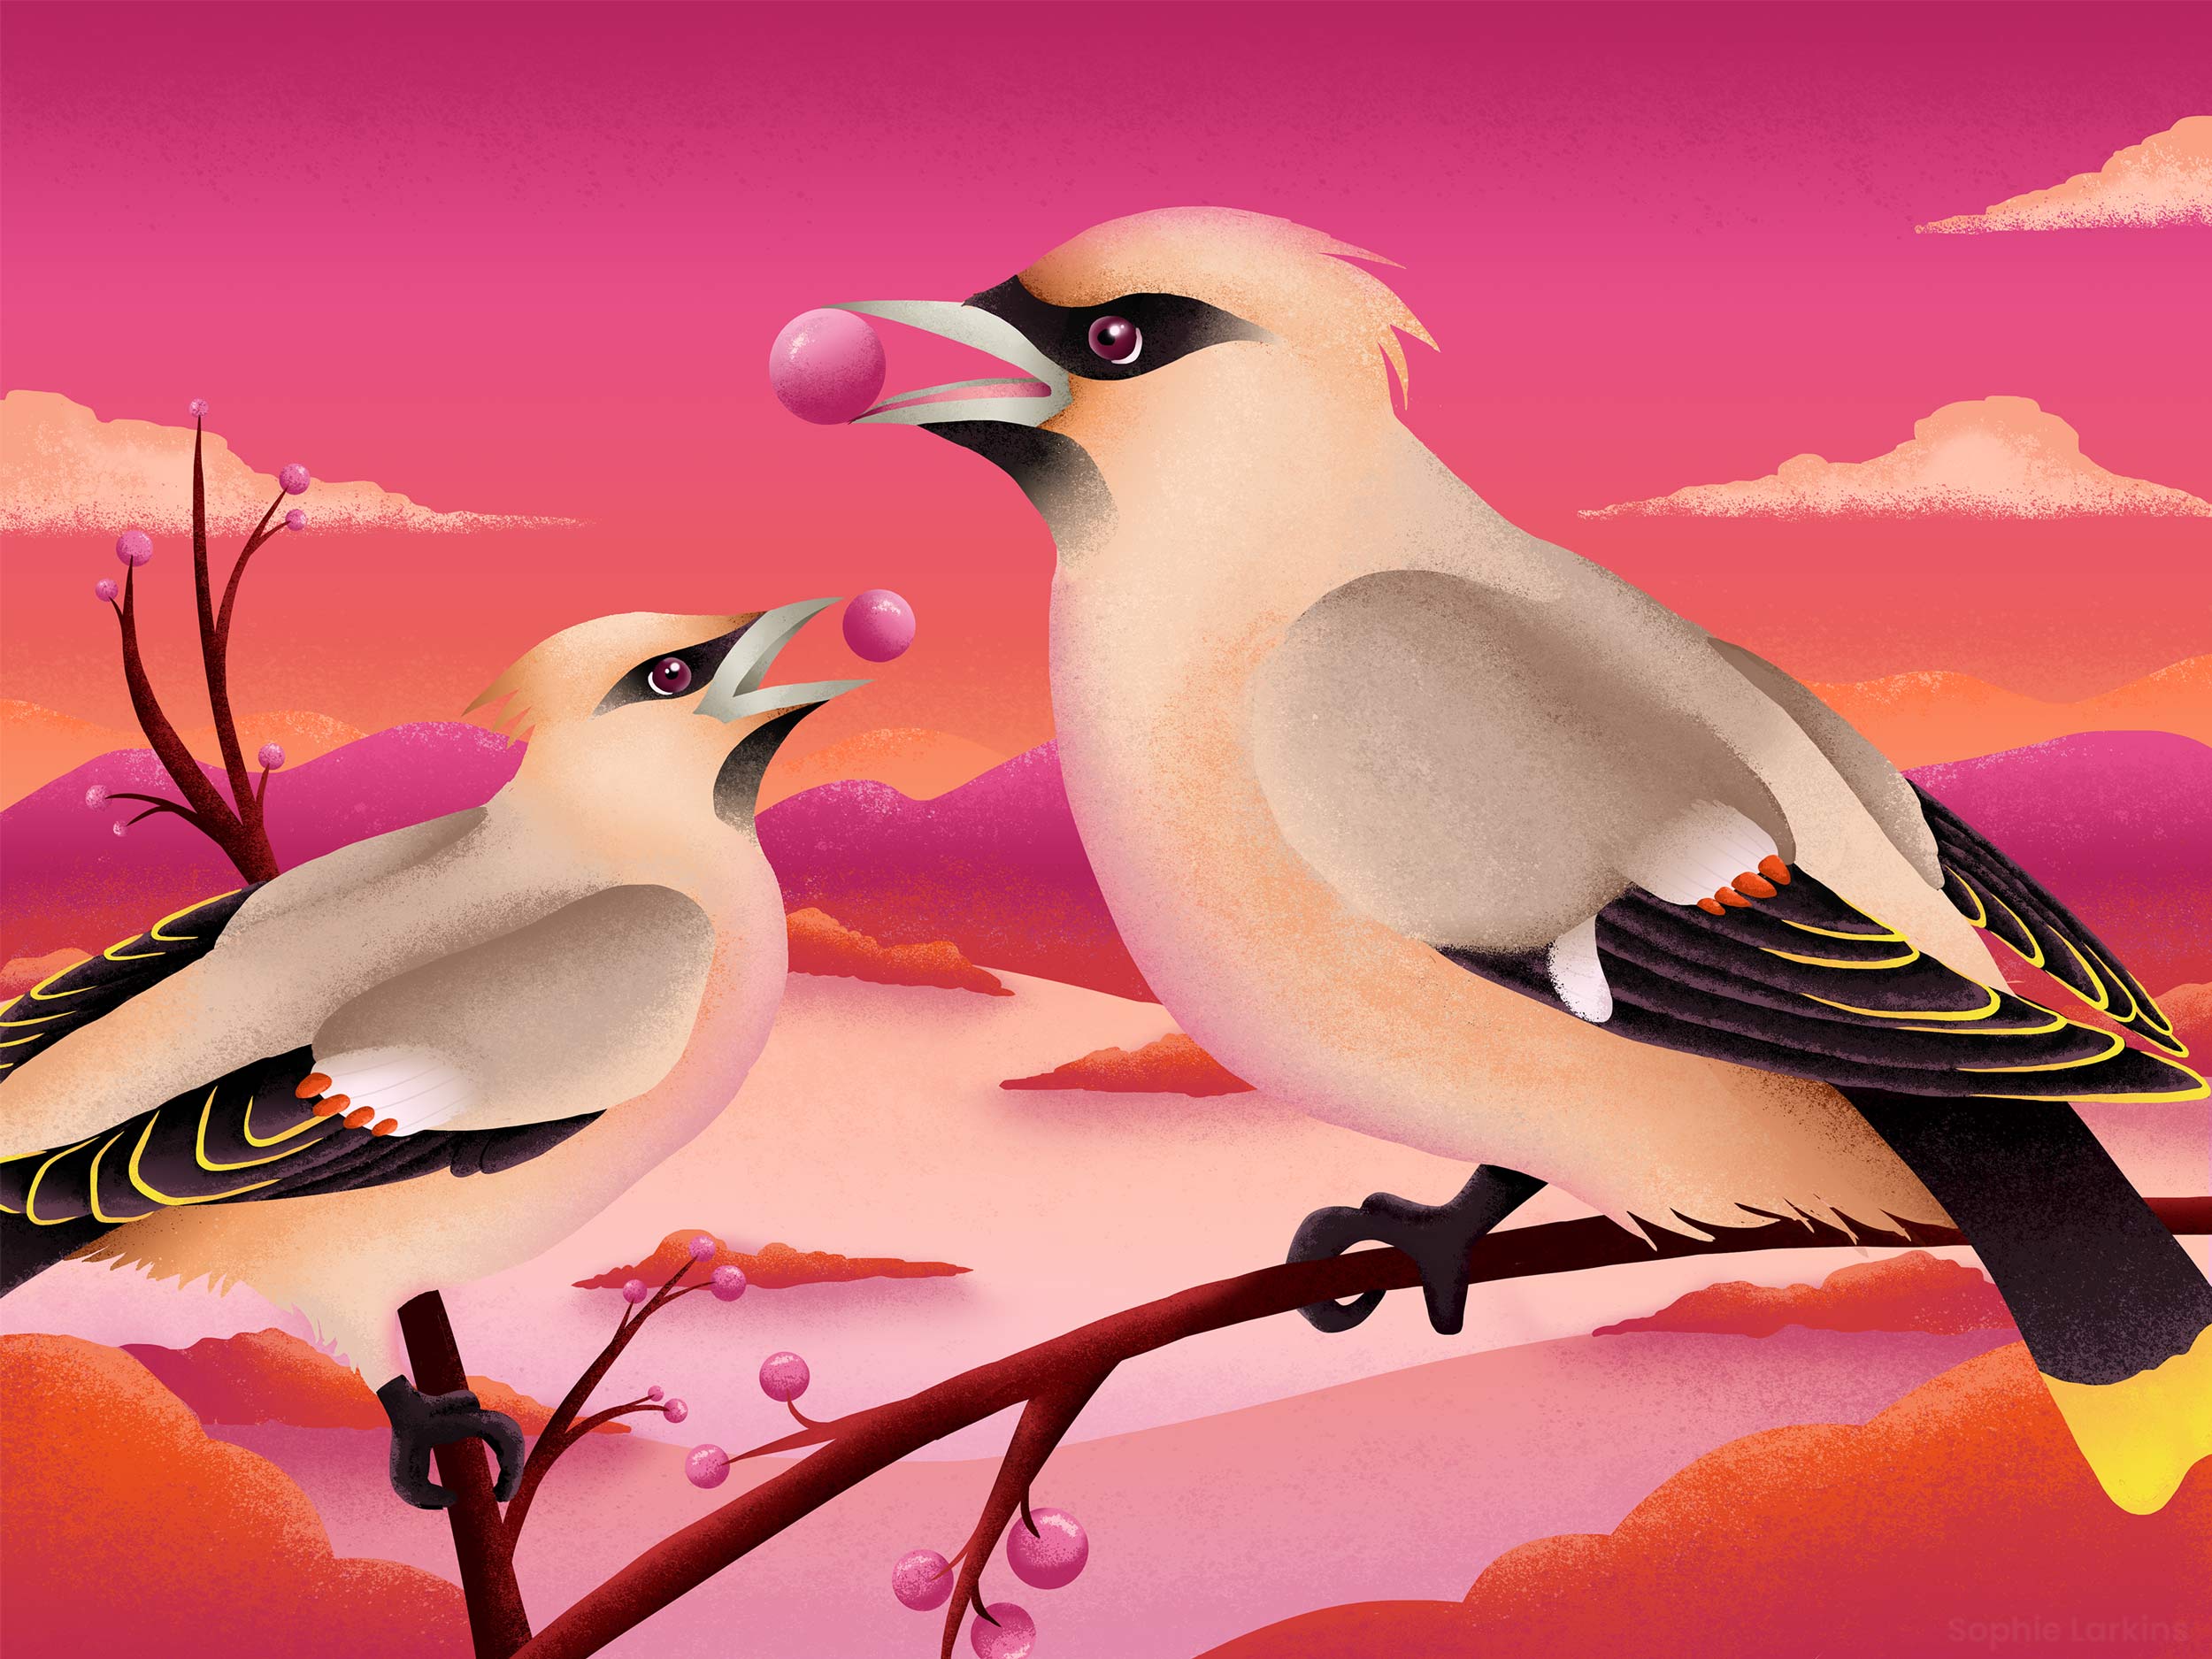 Two Waxwing birds perched on branches eating berries with a saturated pink and orange countryside background